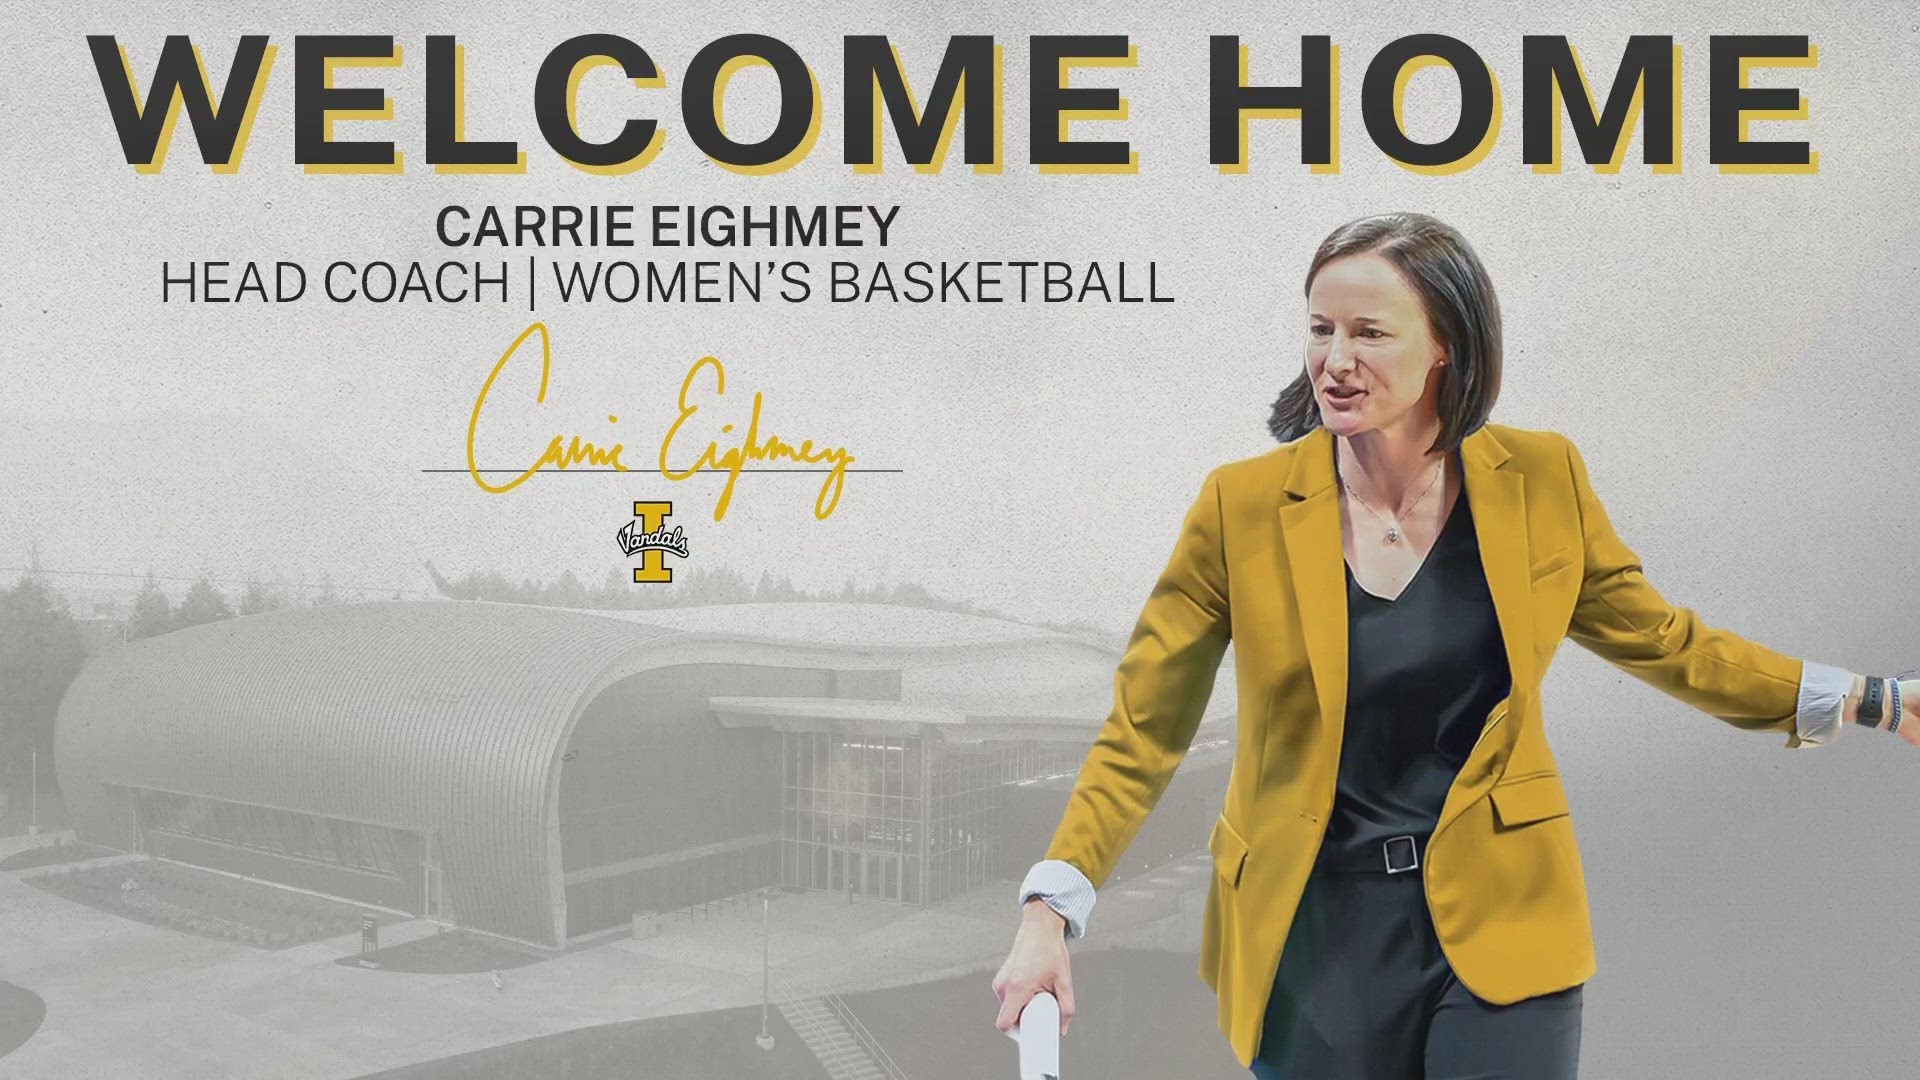 Eighmey has an overall record of 233-105 as a head coach over 11 seasons.